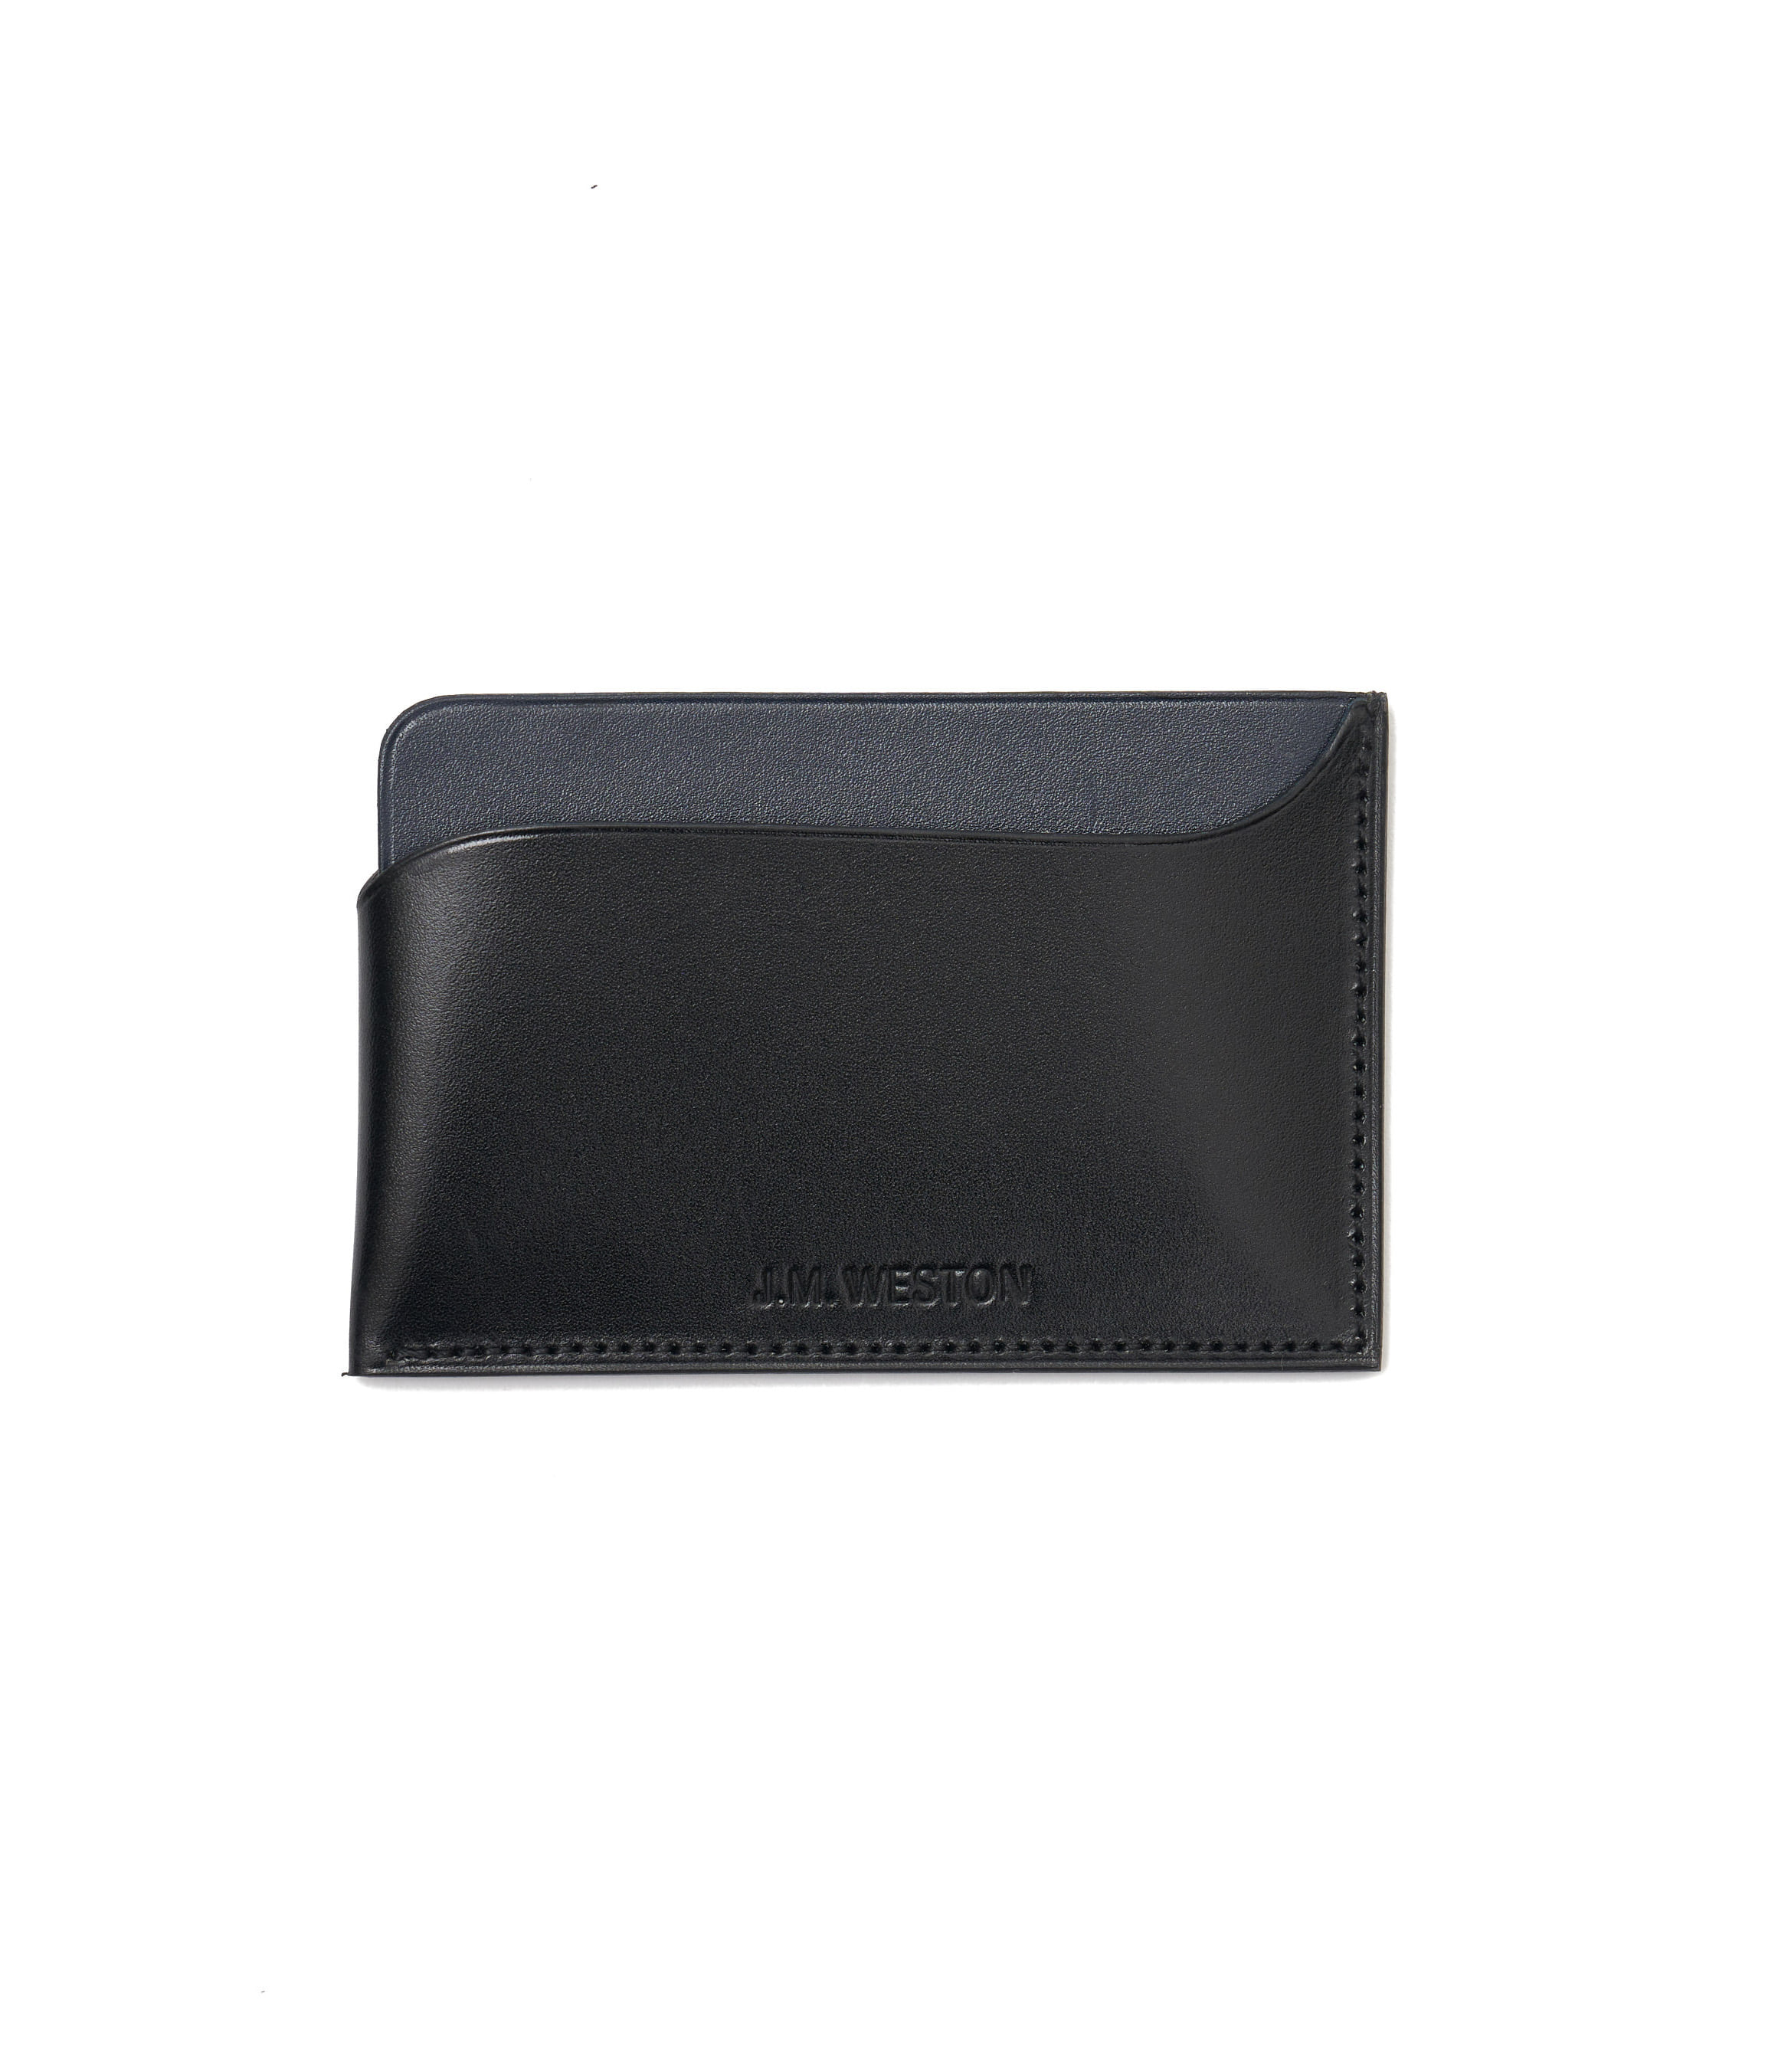 Double You Card Holder Black/Navy